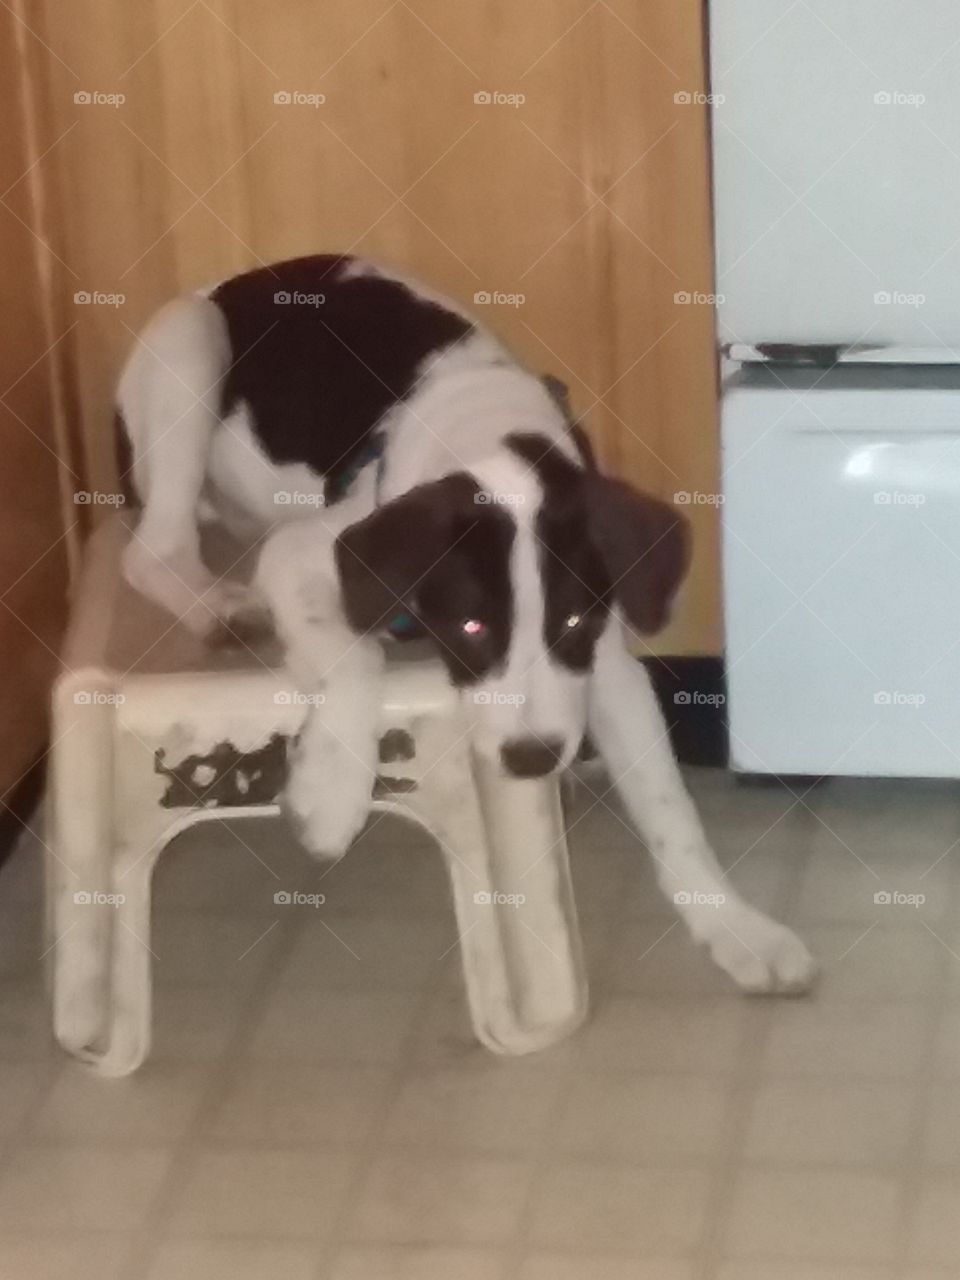 the puppy that's having trouble staying all the way on the footstool